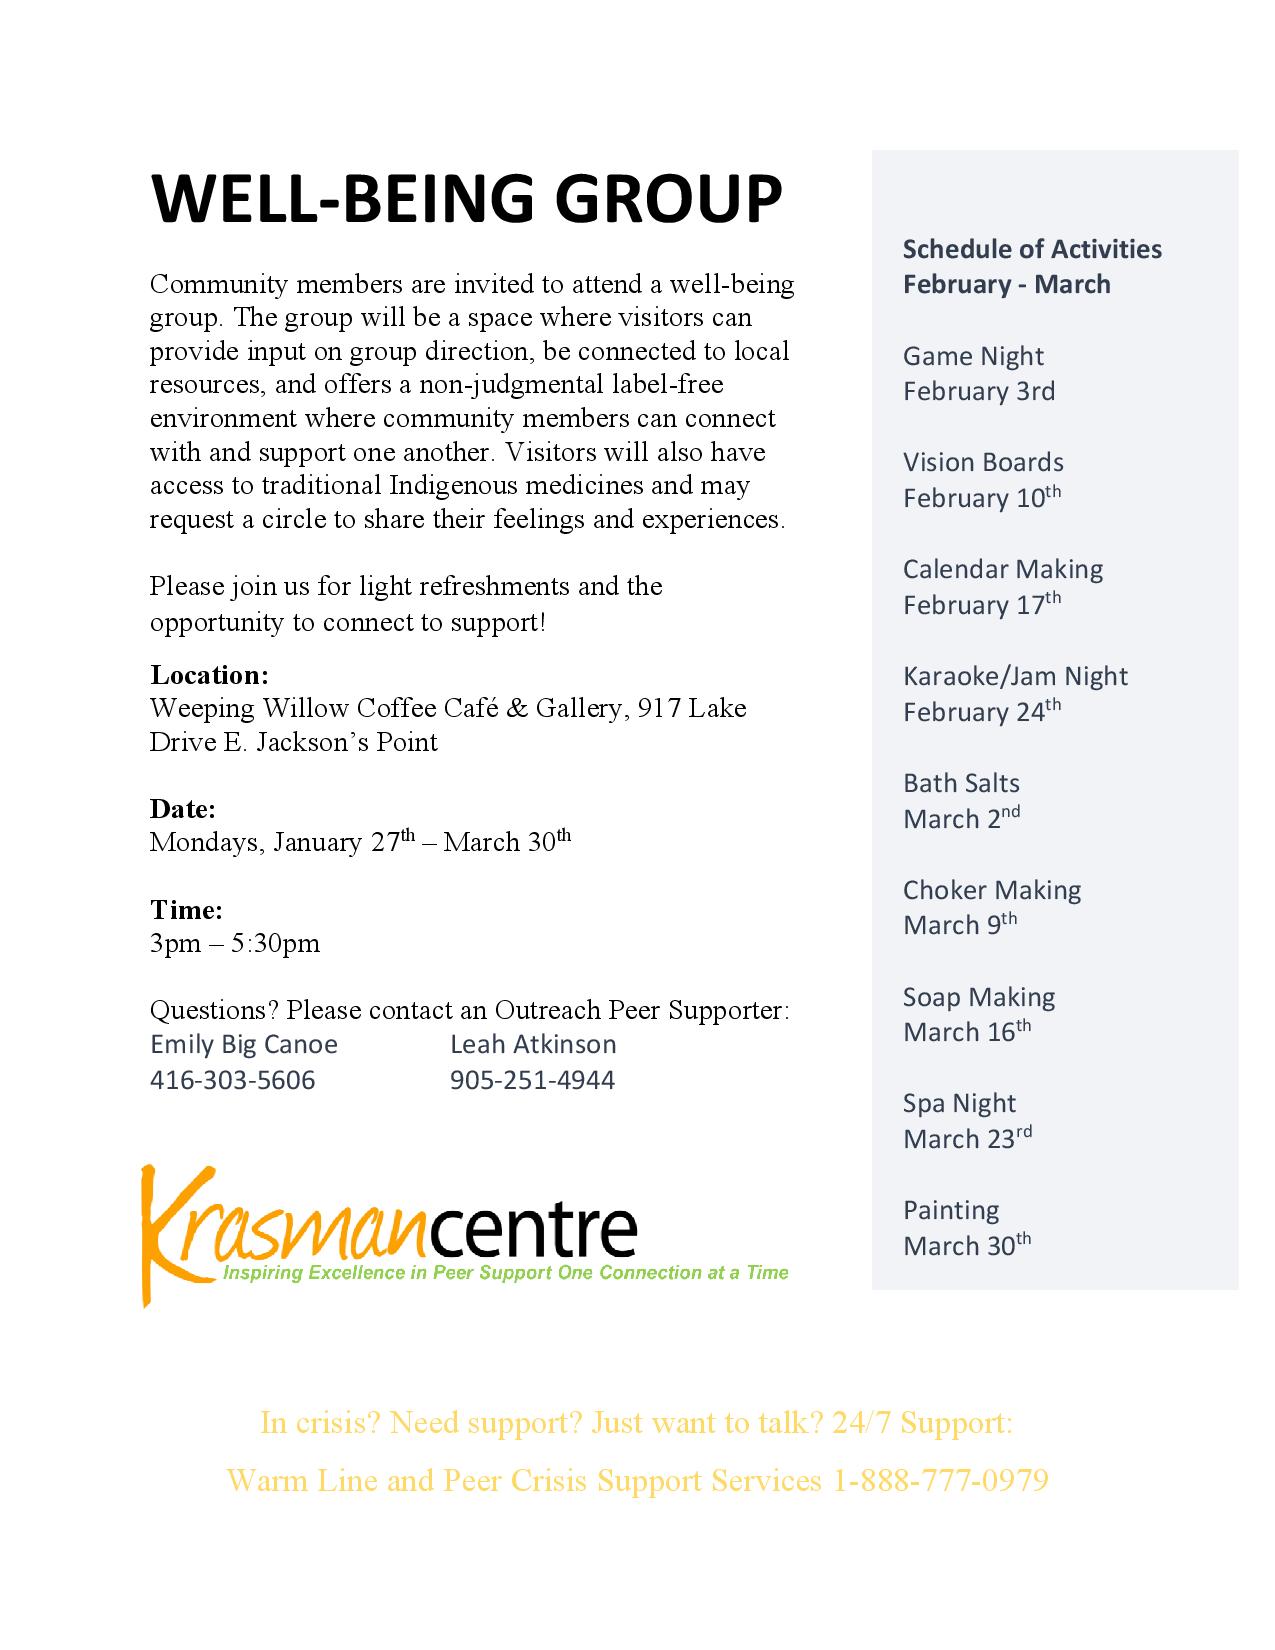 Well-being group in Jackson’s Point, February-March 2020